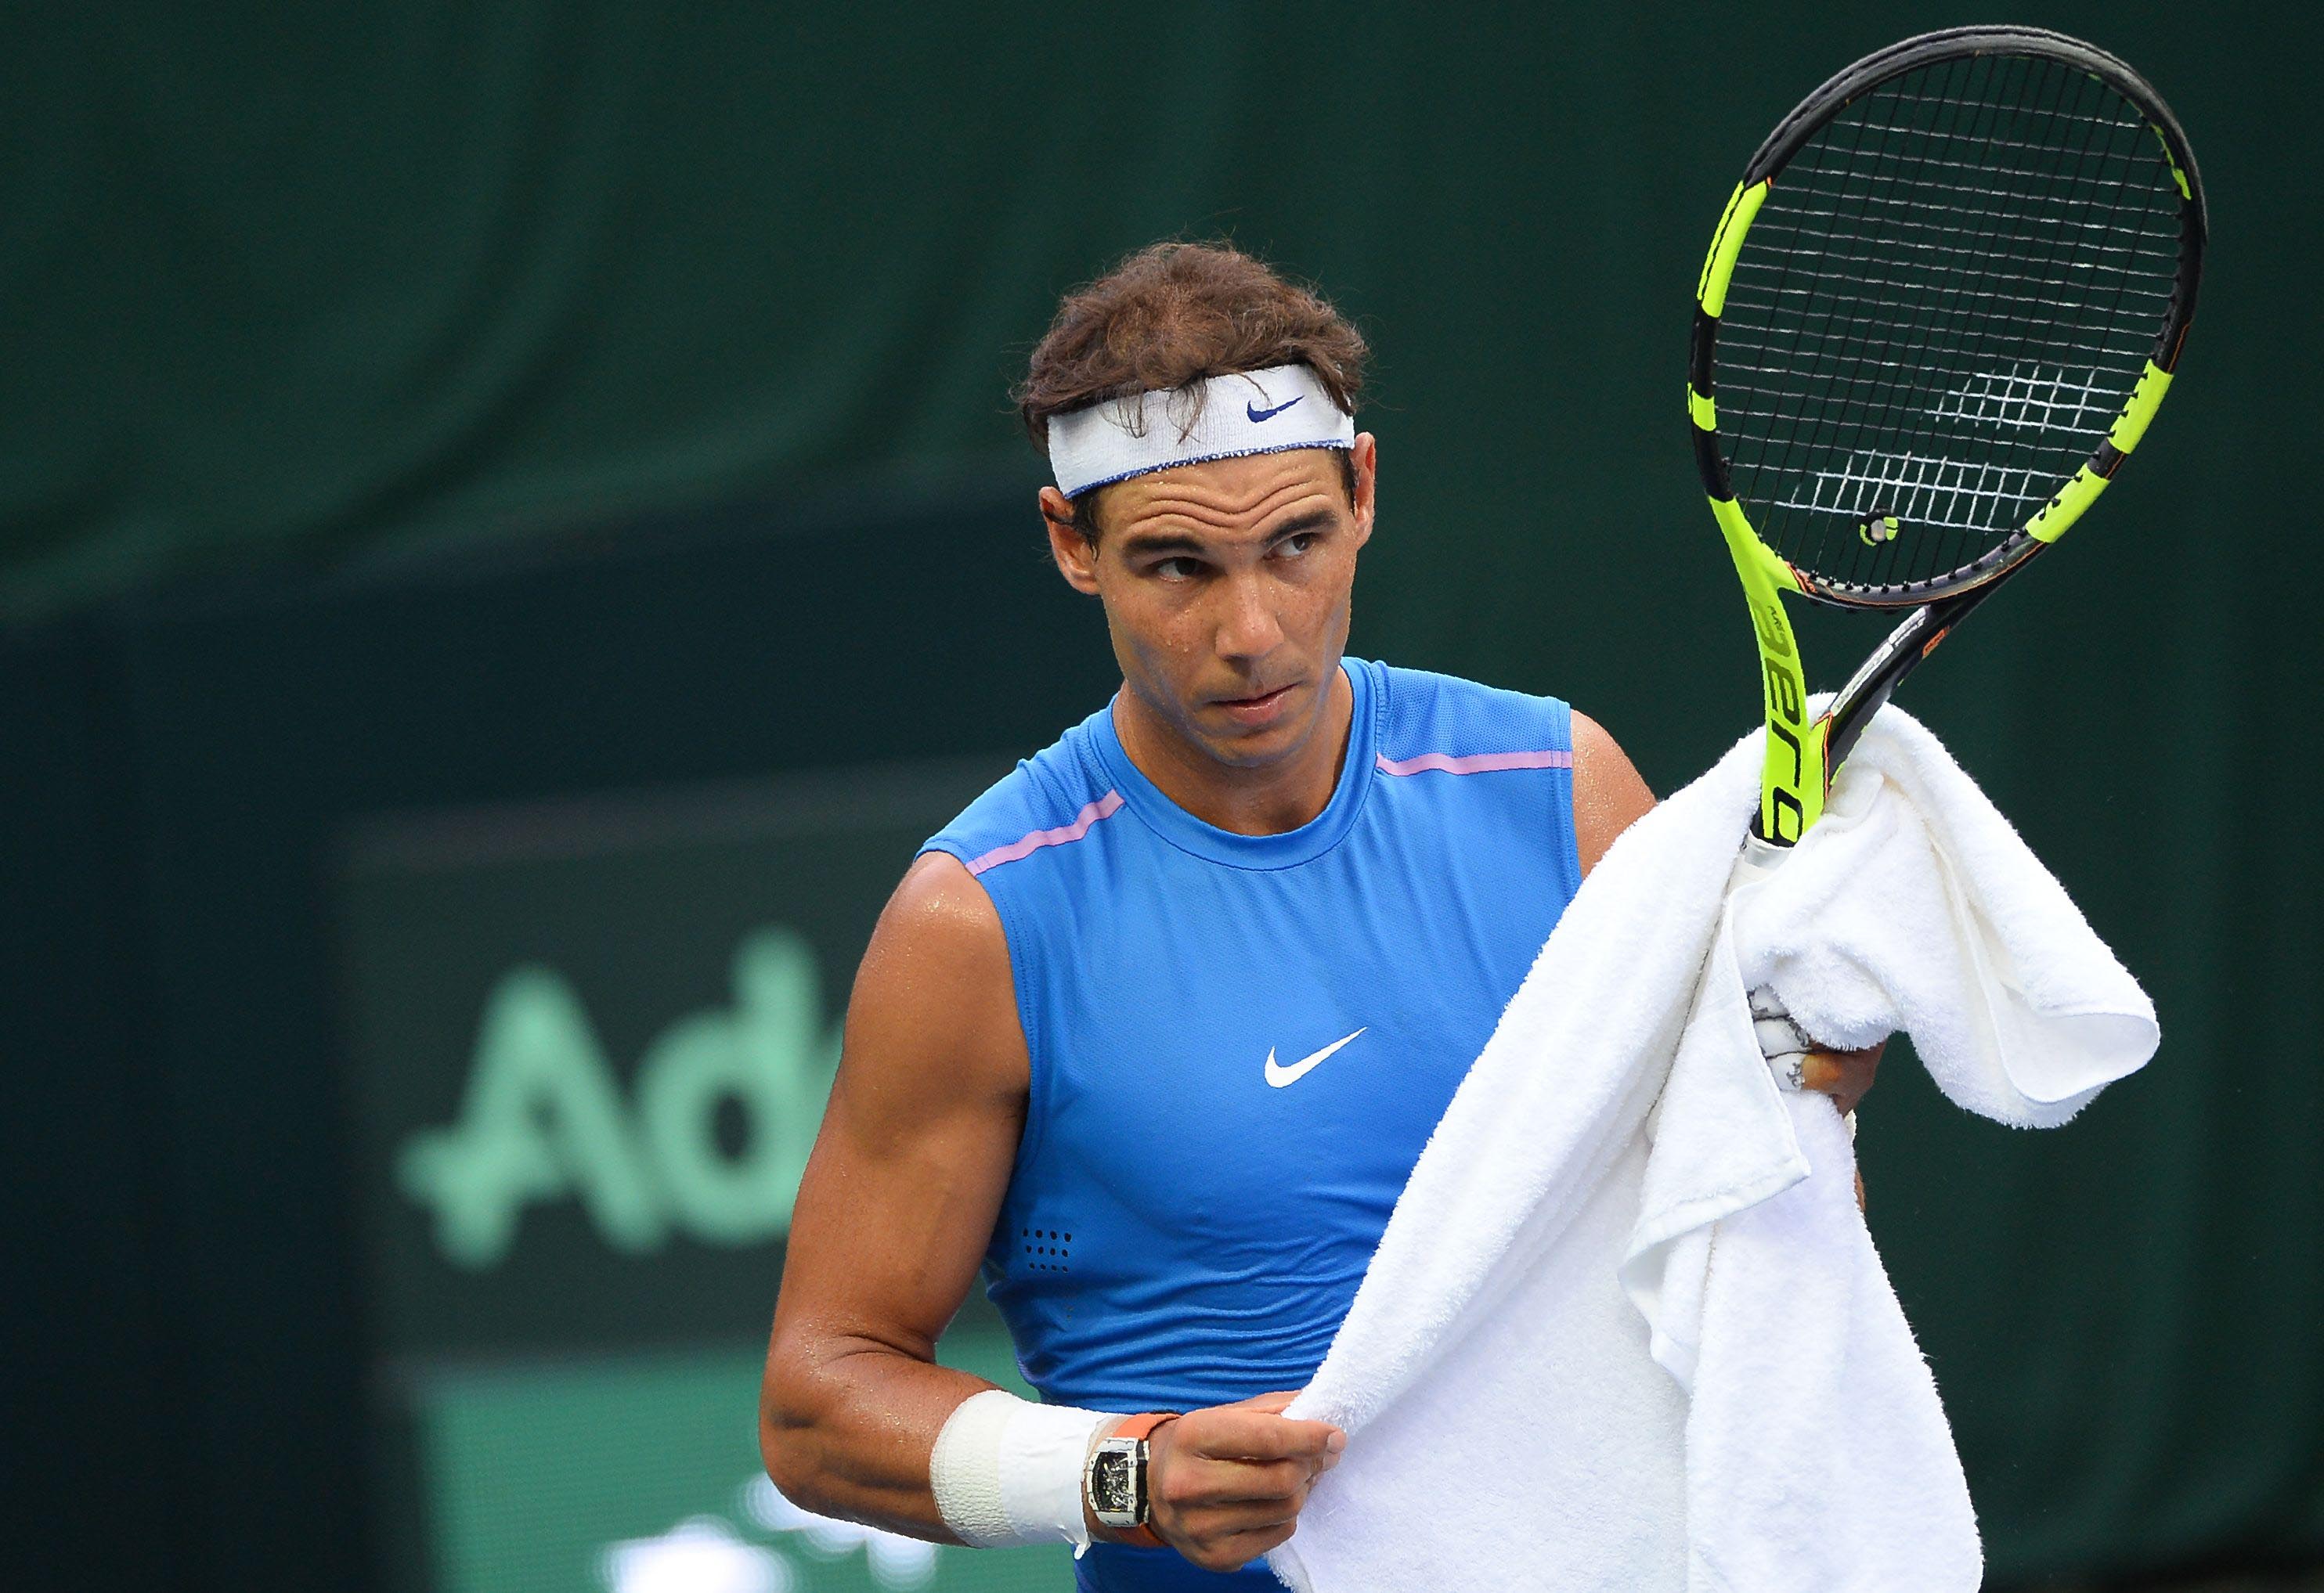 Nadal ends season to recover from wrist injury | Latest News & Updates at Daily News ...